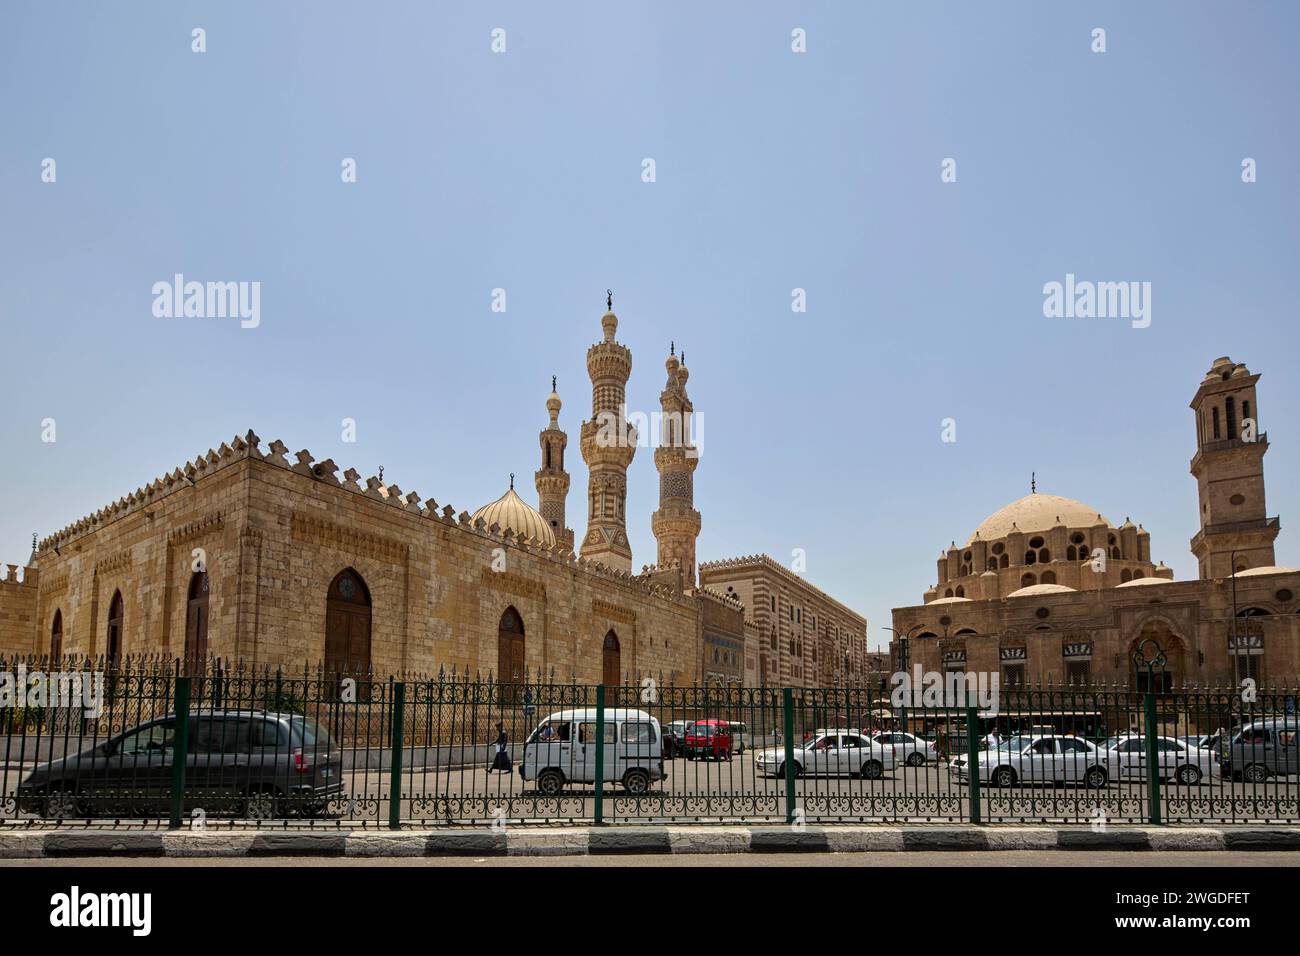 Al Azhar Mosque and Mosque of Abu Al Dhahab in Cairo, Egypt Stock Photo